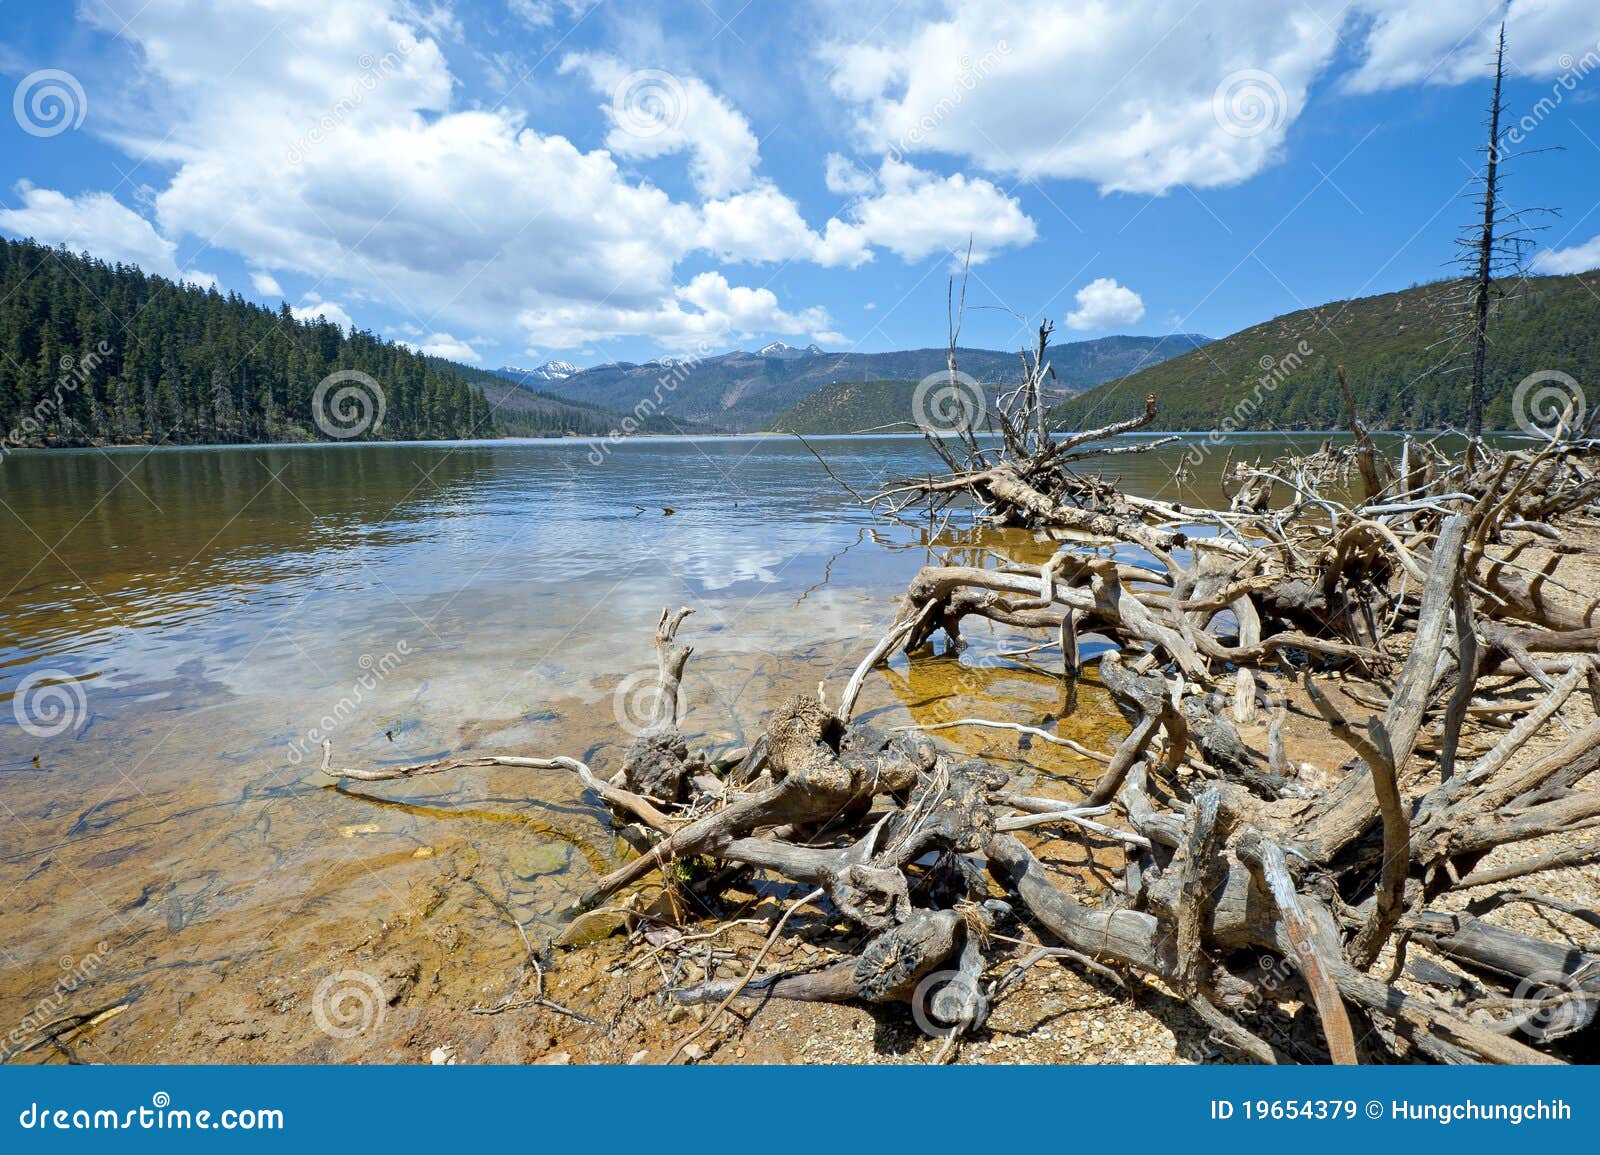 felled trees in front of national lake pudacuo